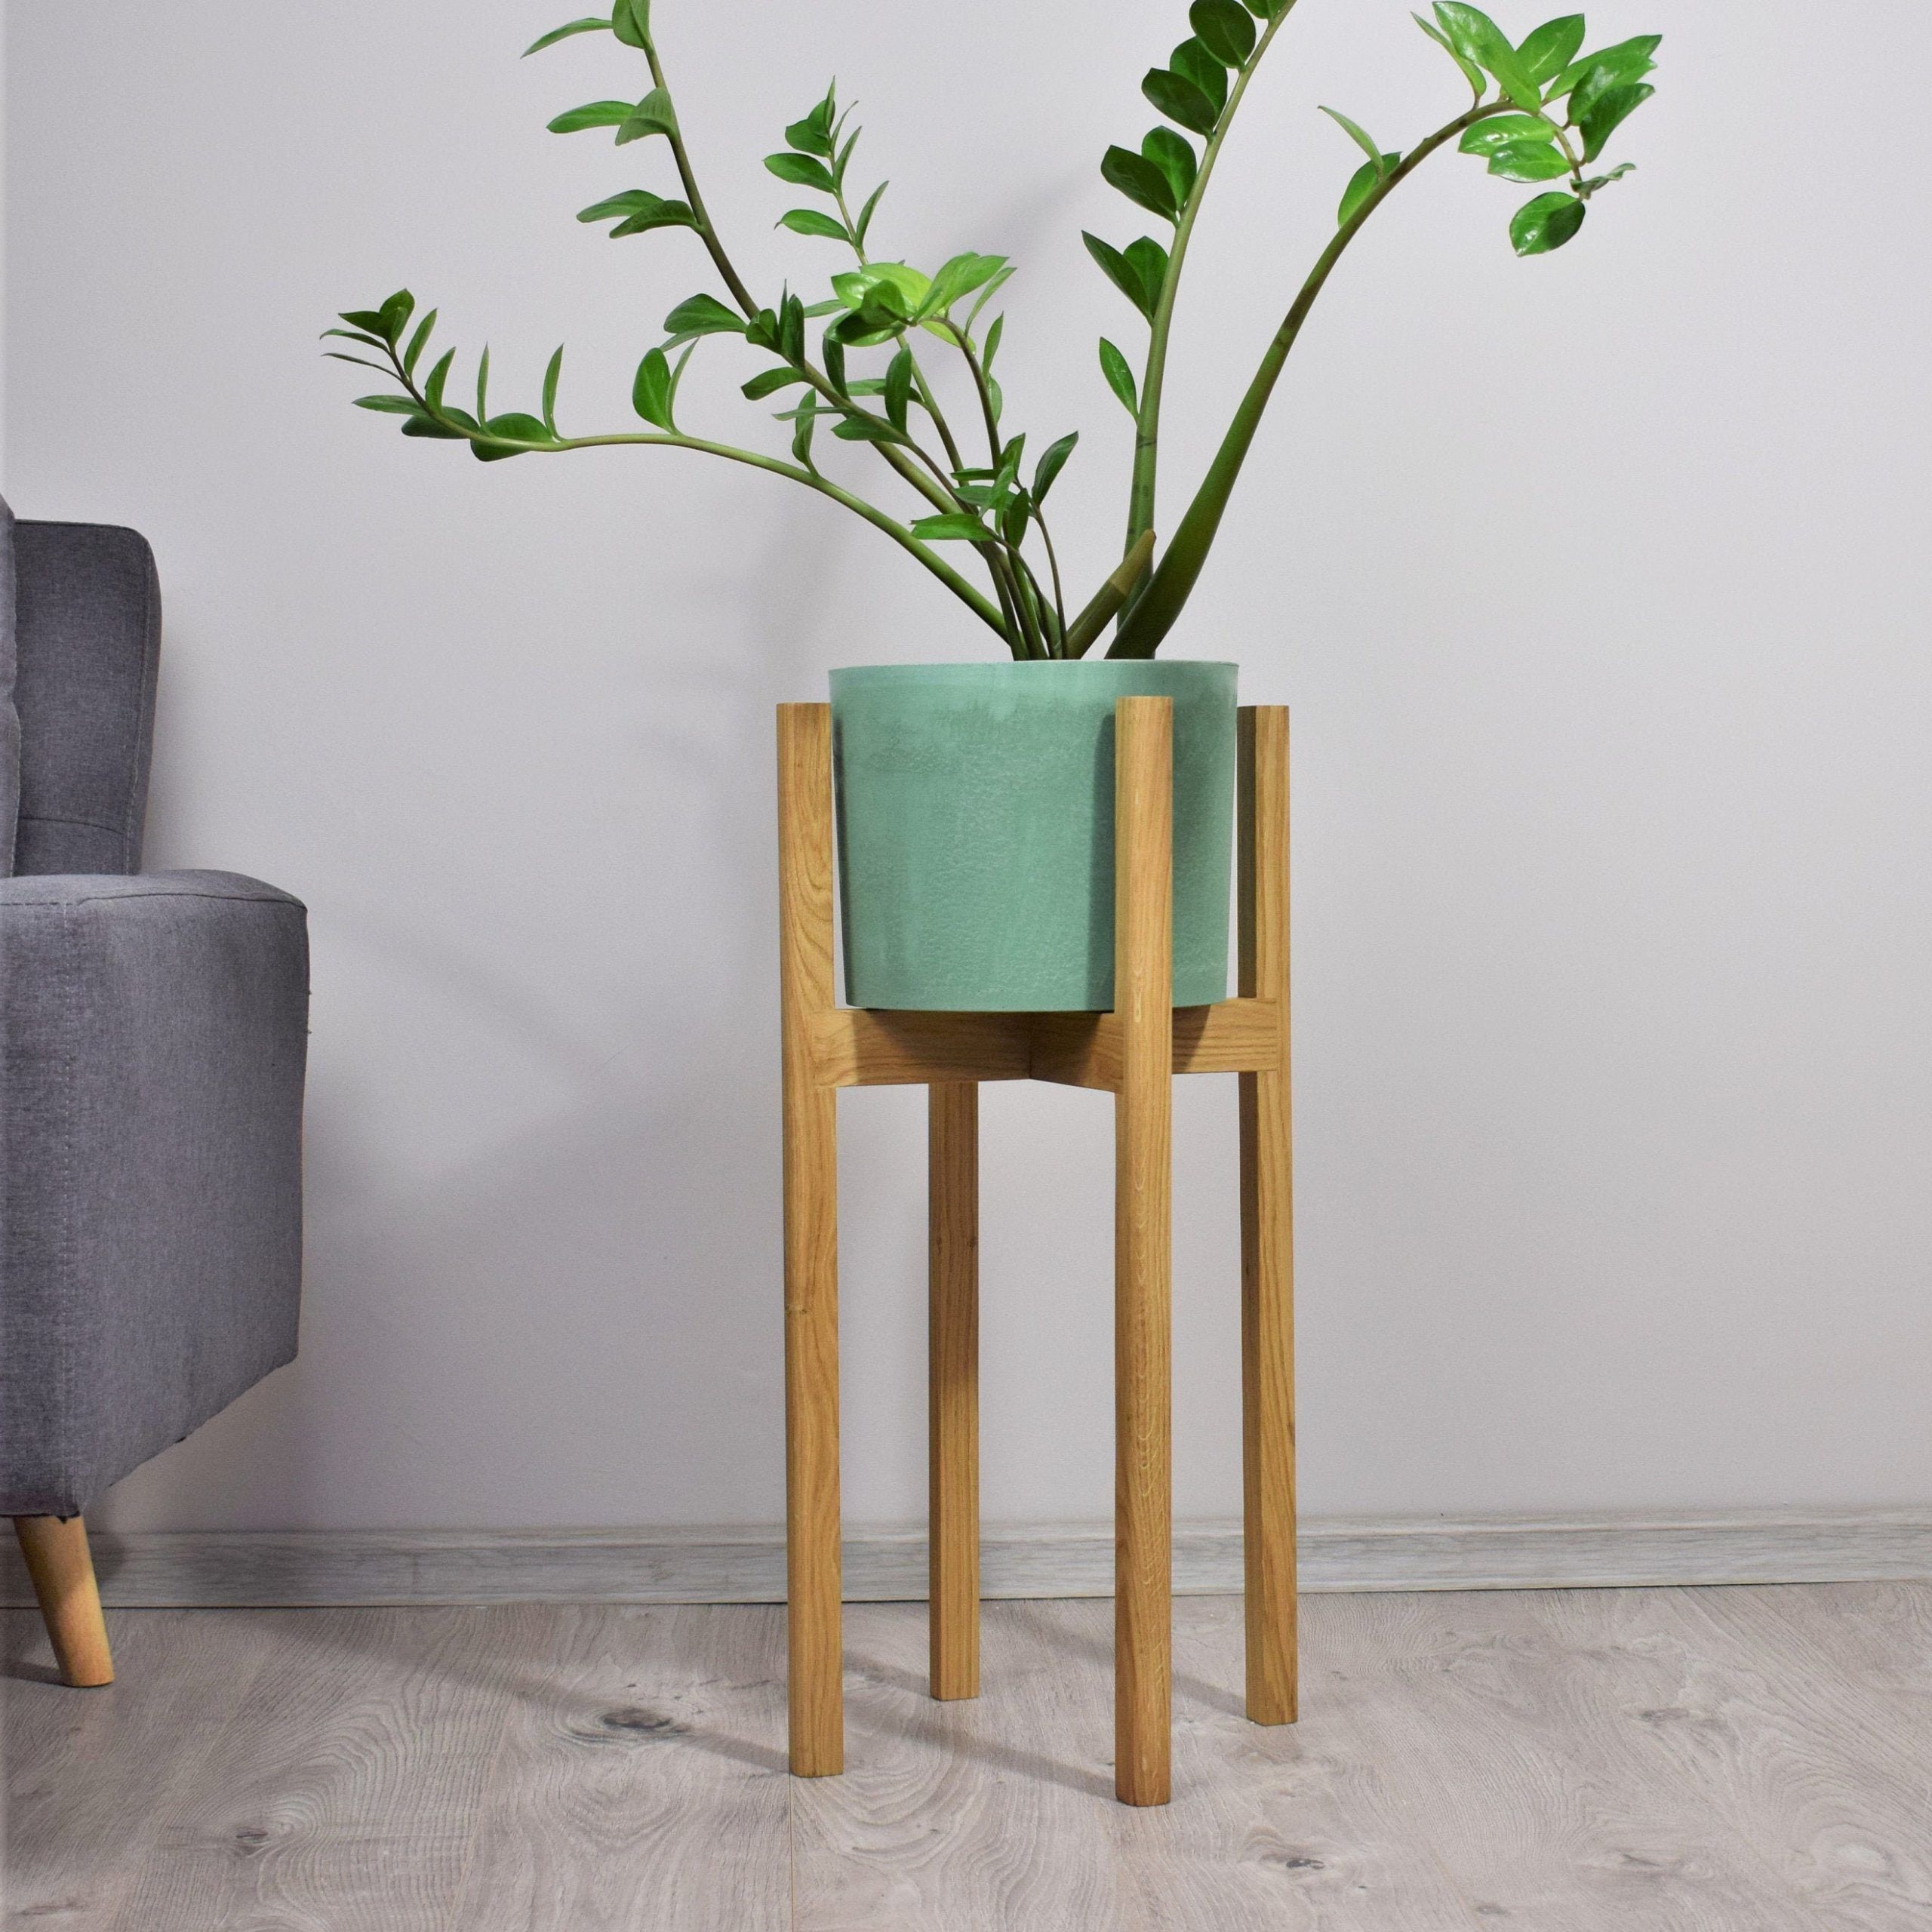 Tall Plant Stands Made Of Natural Oak Wood (View 3 of 10)